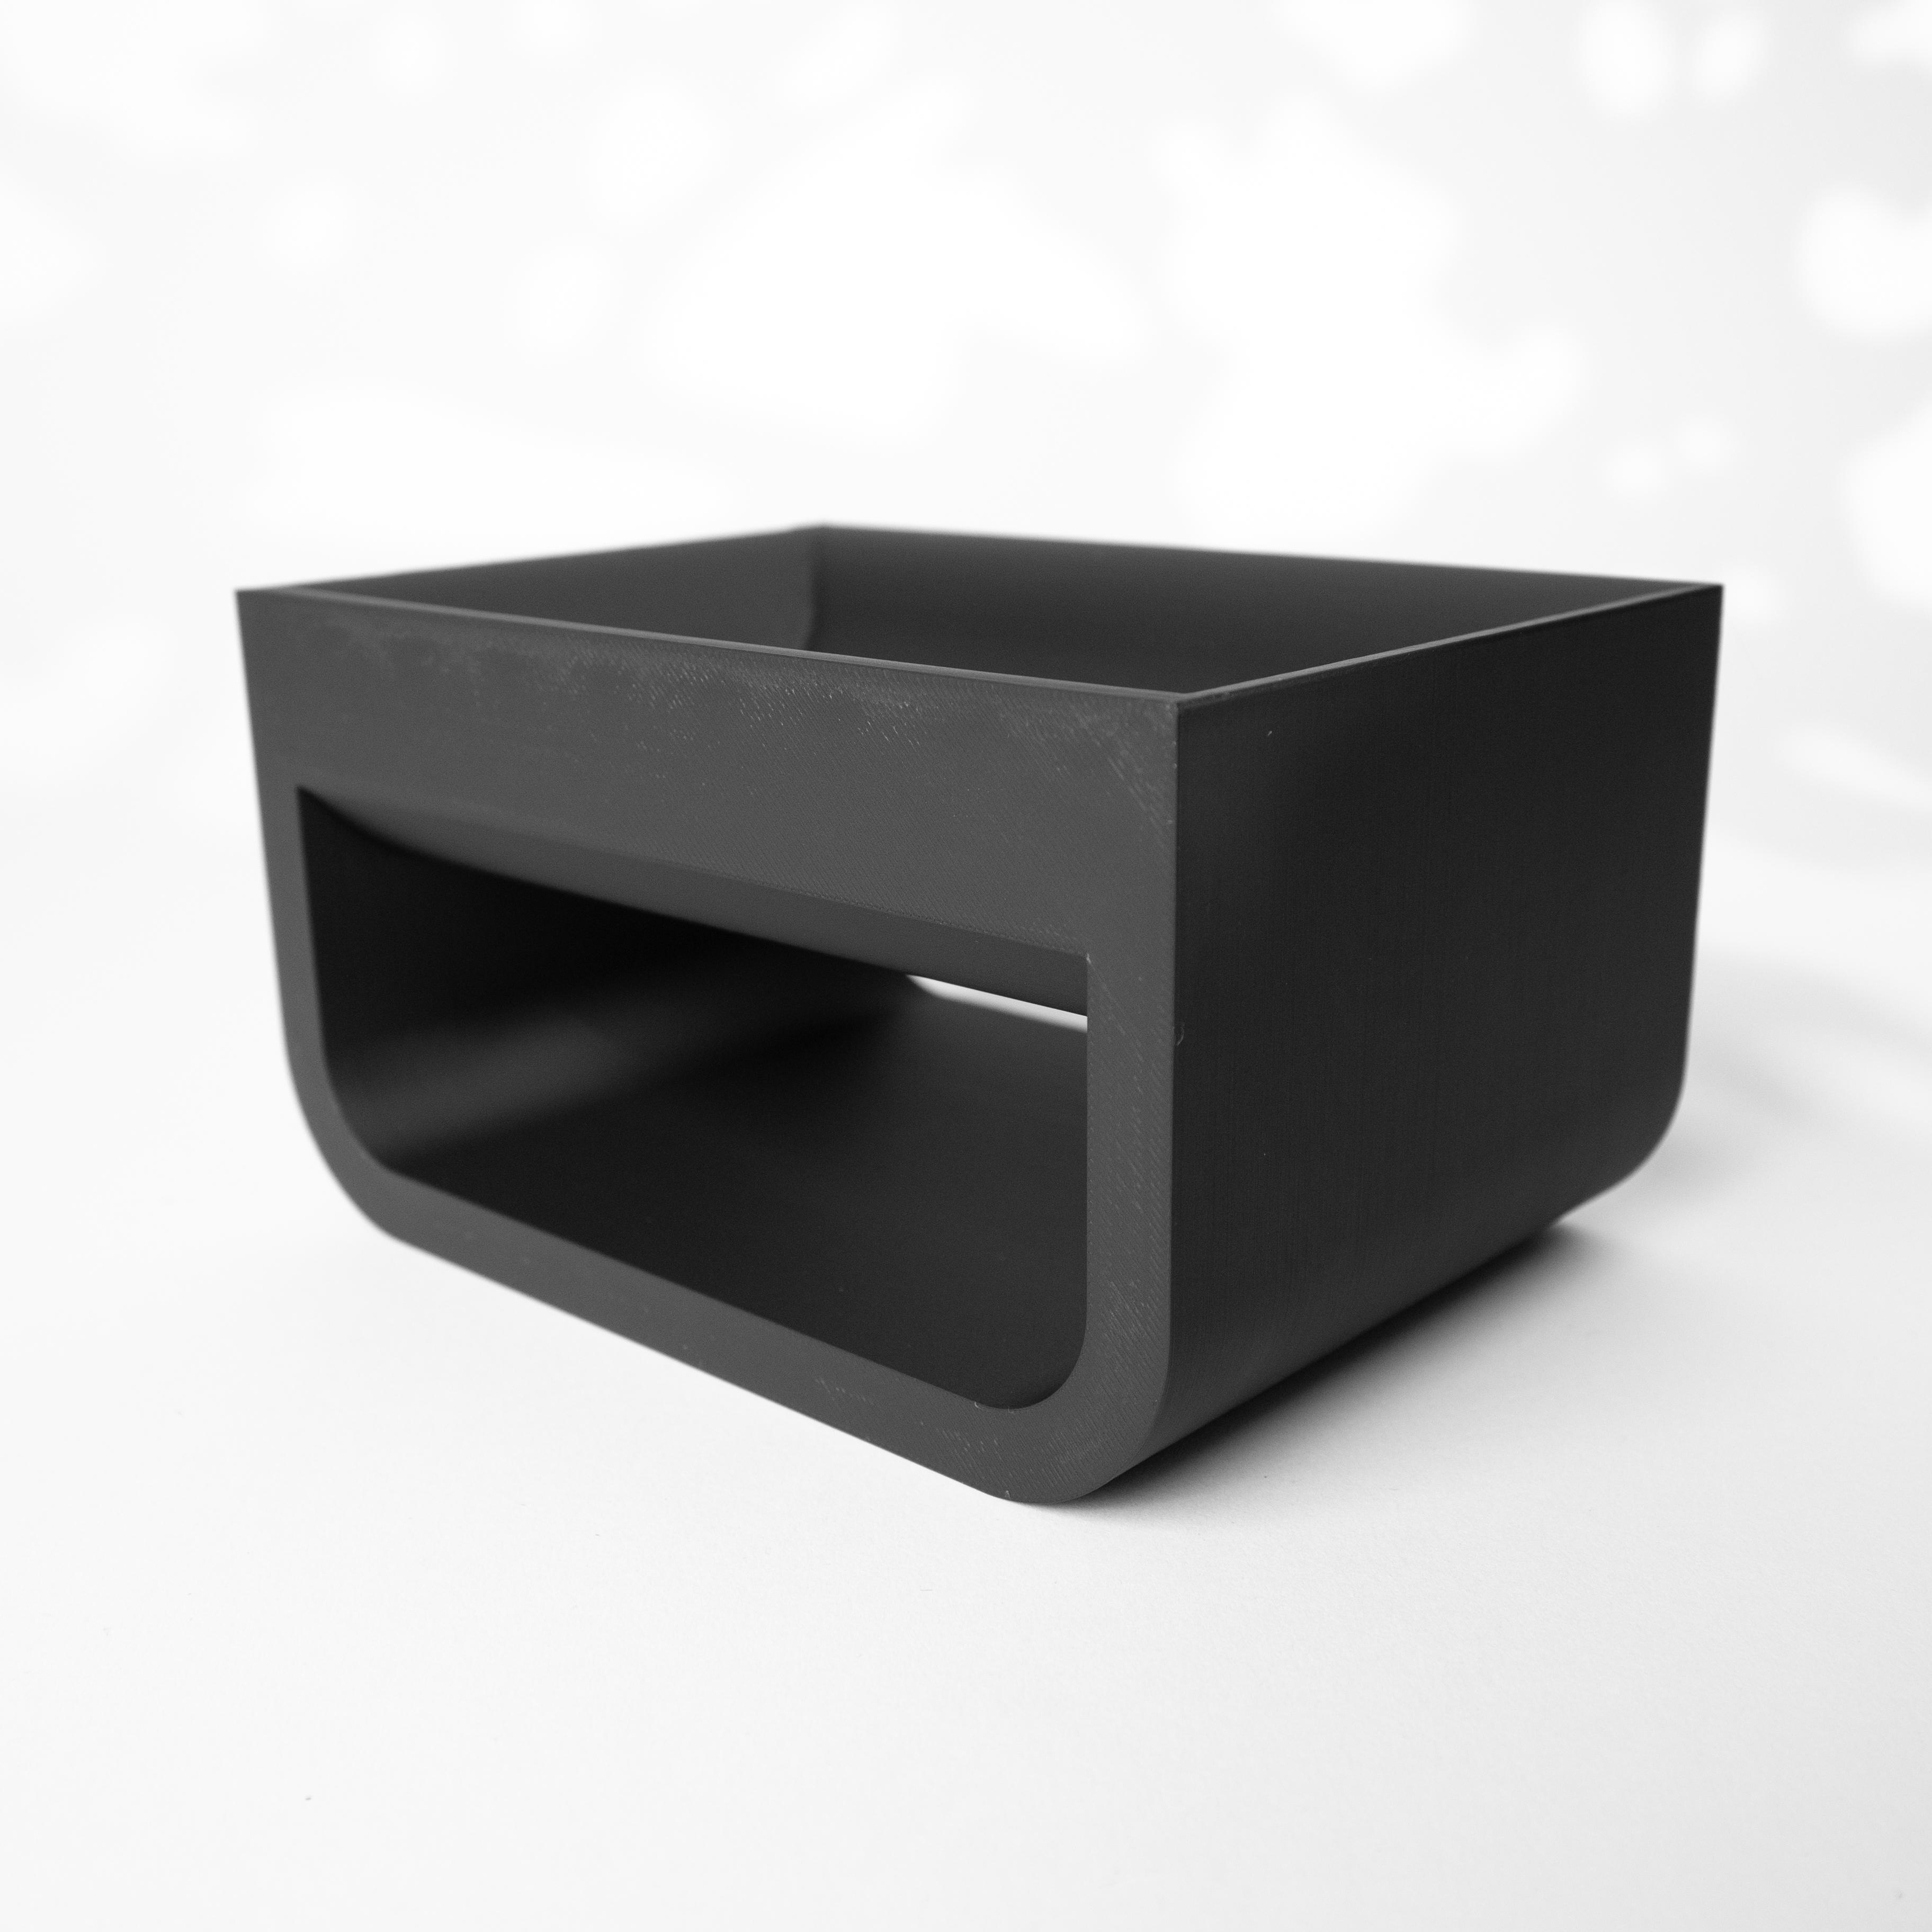 The Luxa Catch-all Bowl or Desk Organizer No Supports | Modern Office and Home Decor 3d model